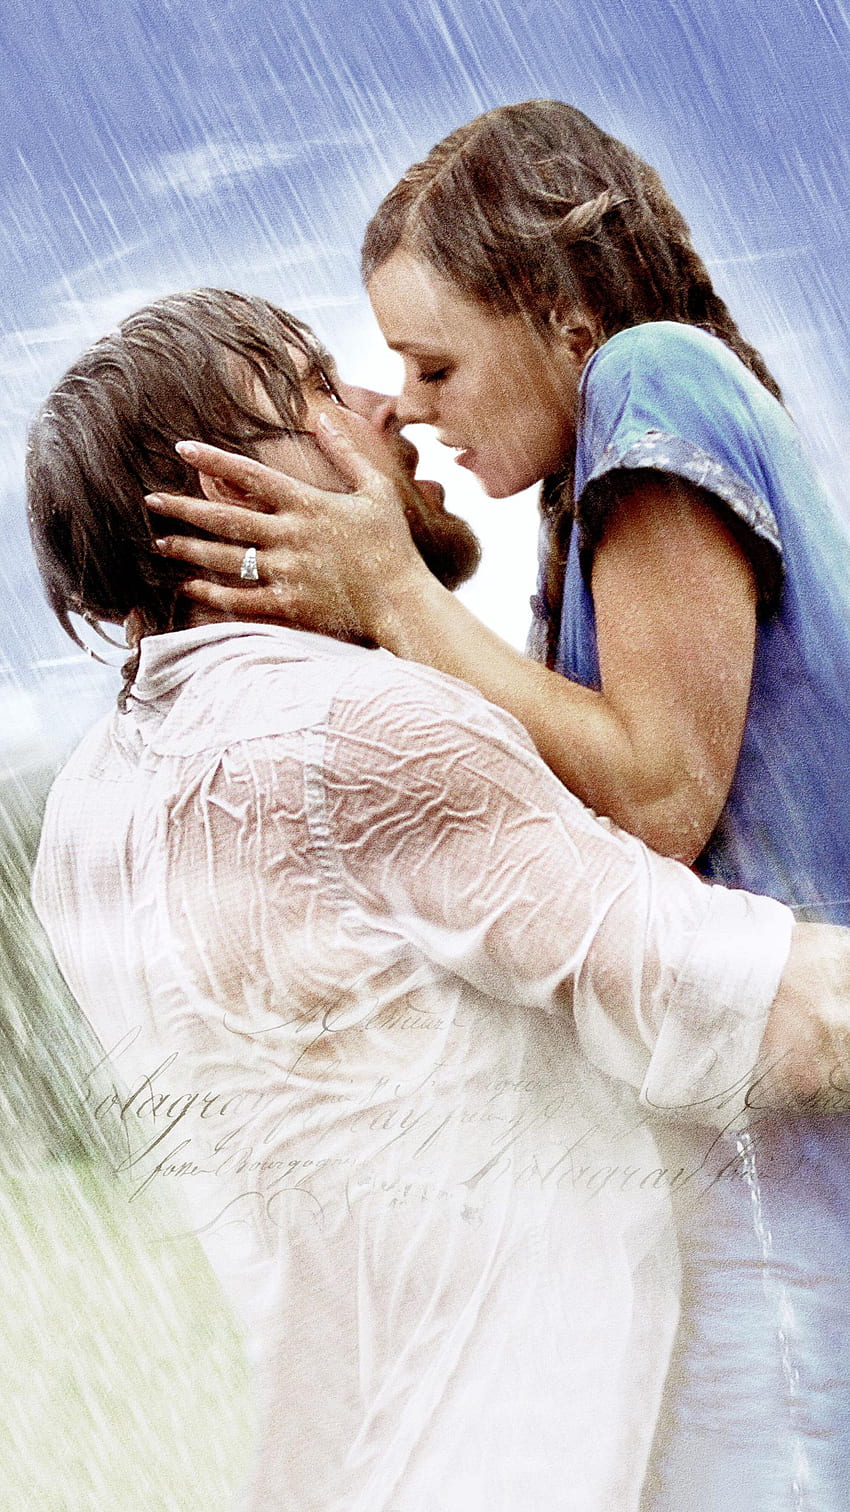 The Notebook (2022) movie HD phone wallpaper